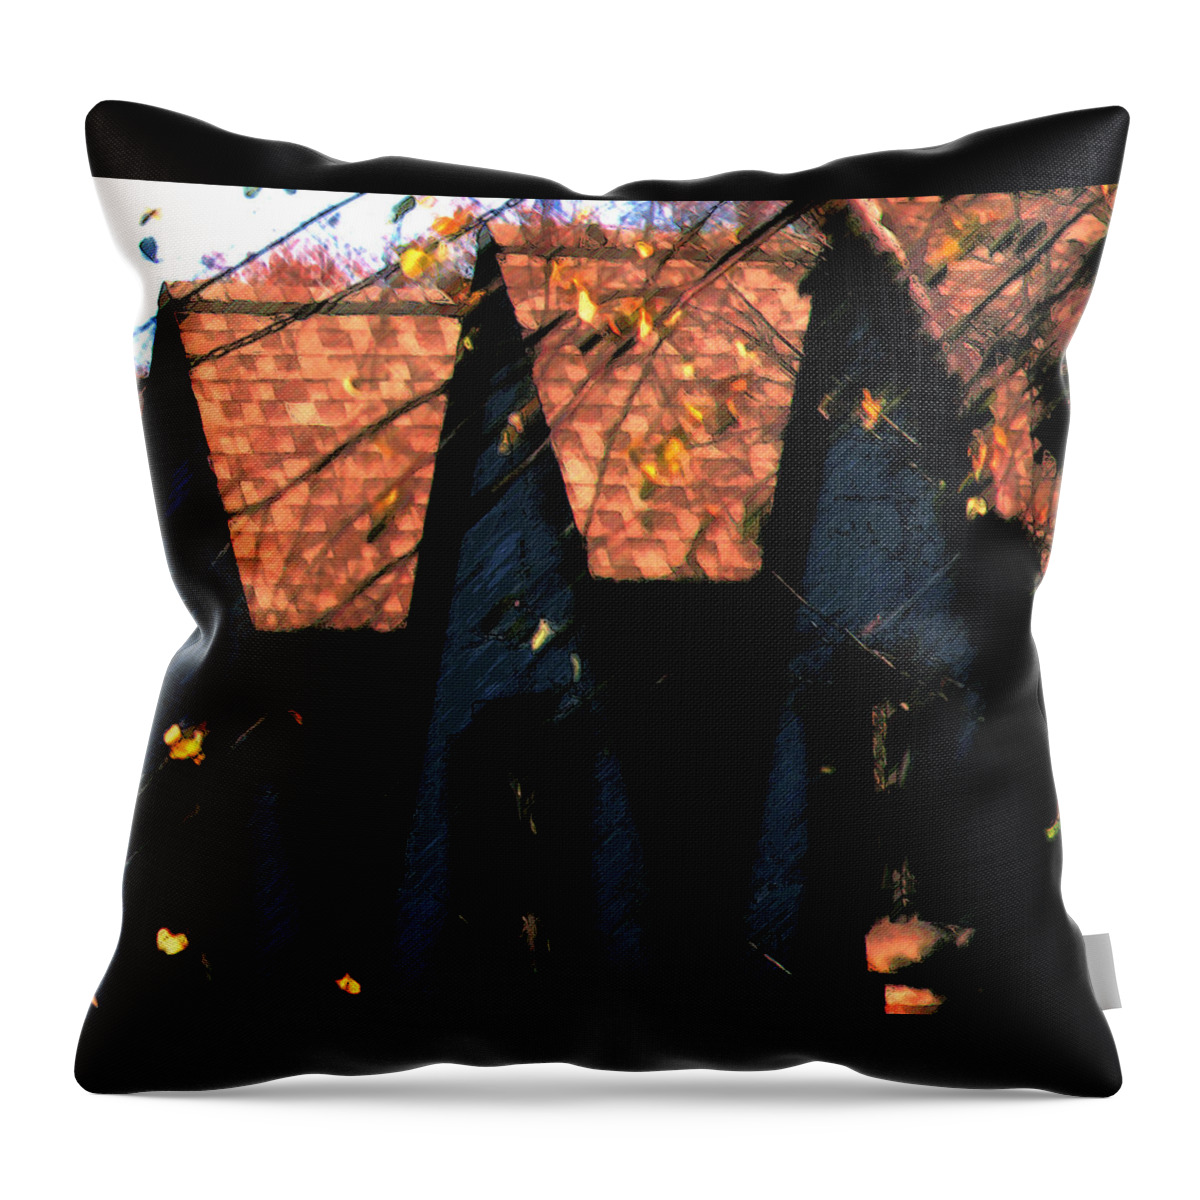 House Throw Pillow featuring the photograph Three Little Pigs by Linda Shafer